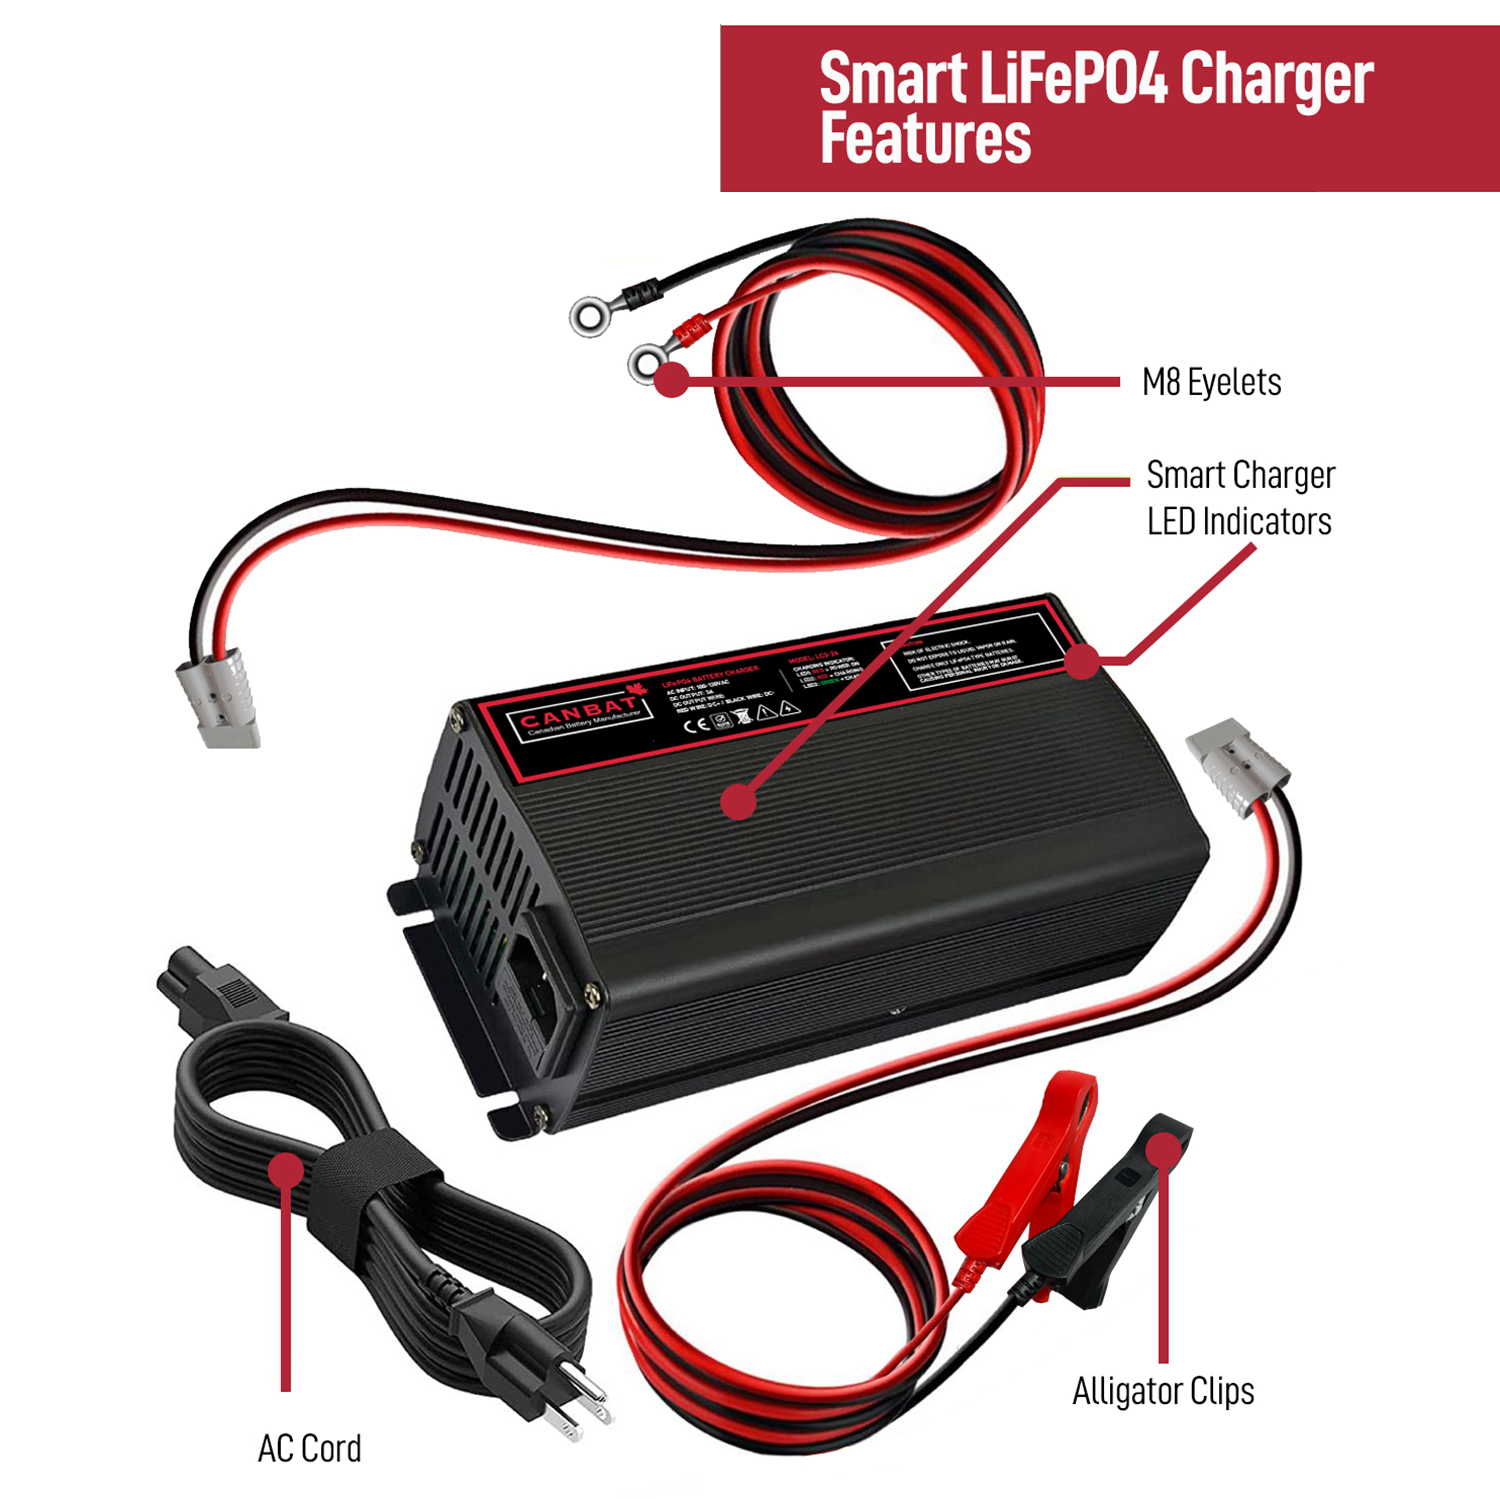 12V 15A Lithium Battery Charger (LiFePO₄) - Free Shipping Canada